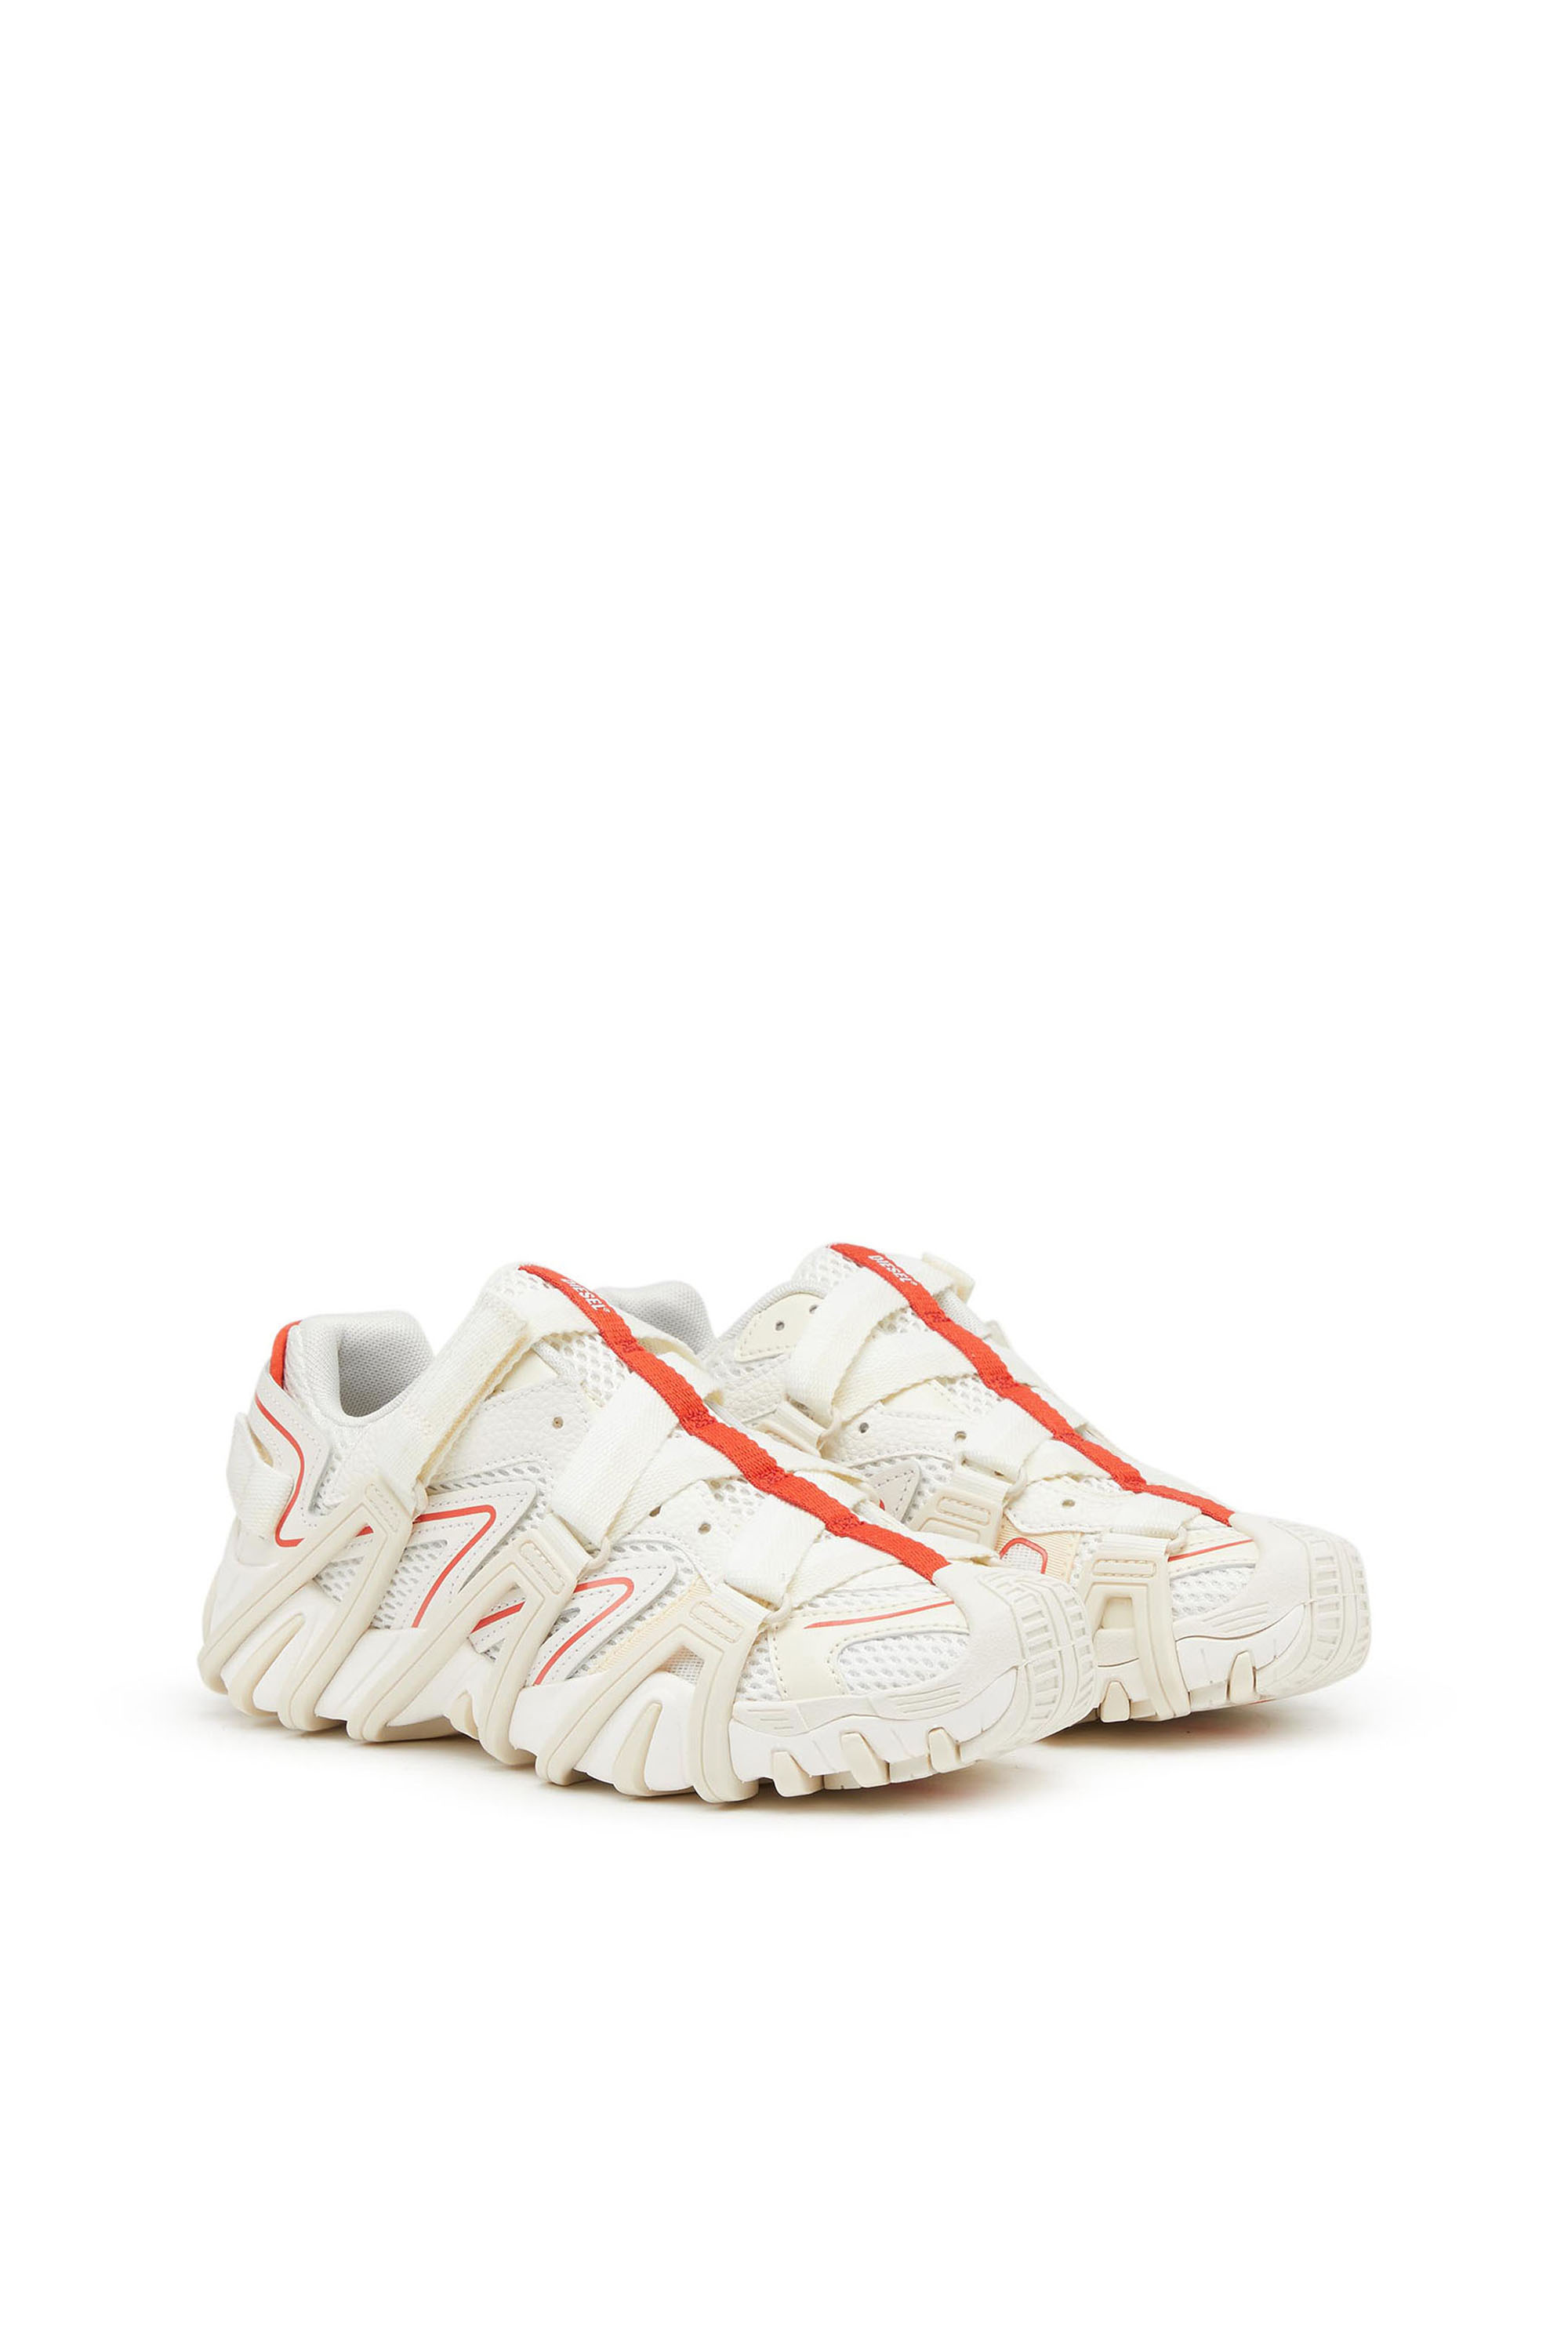 Diesel - S-PROTOTYPE-CR  W, Woman S-Prototype-CR  W - Cage sneakers in mesh and leather in Multicolor - Image 3